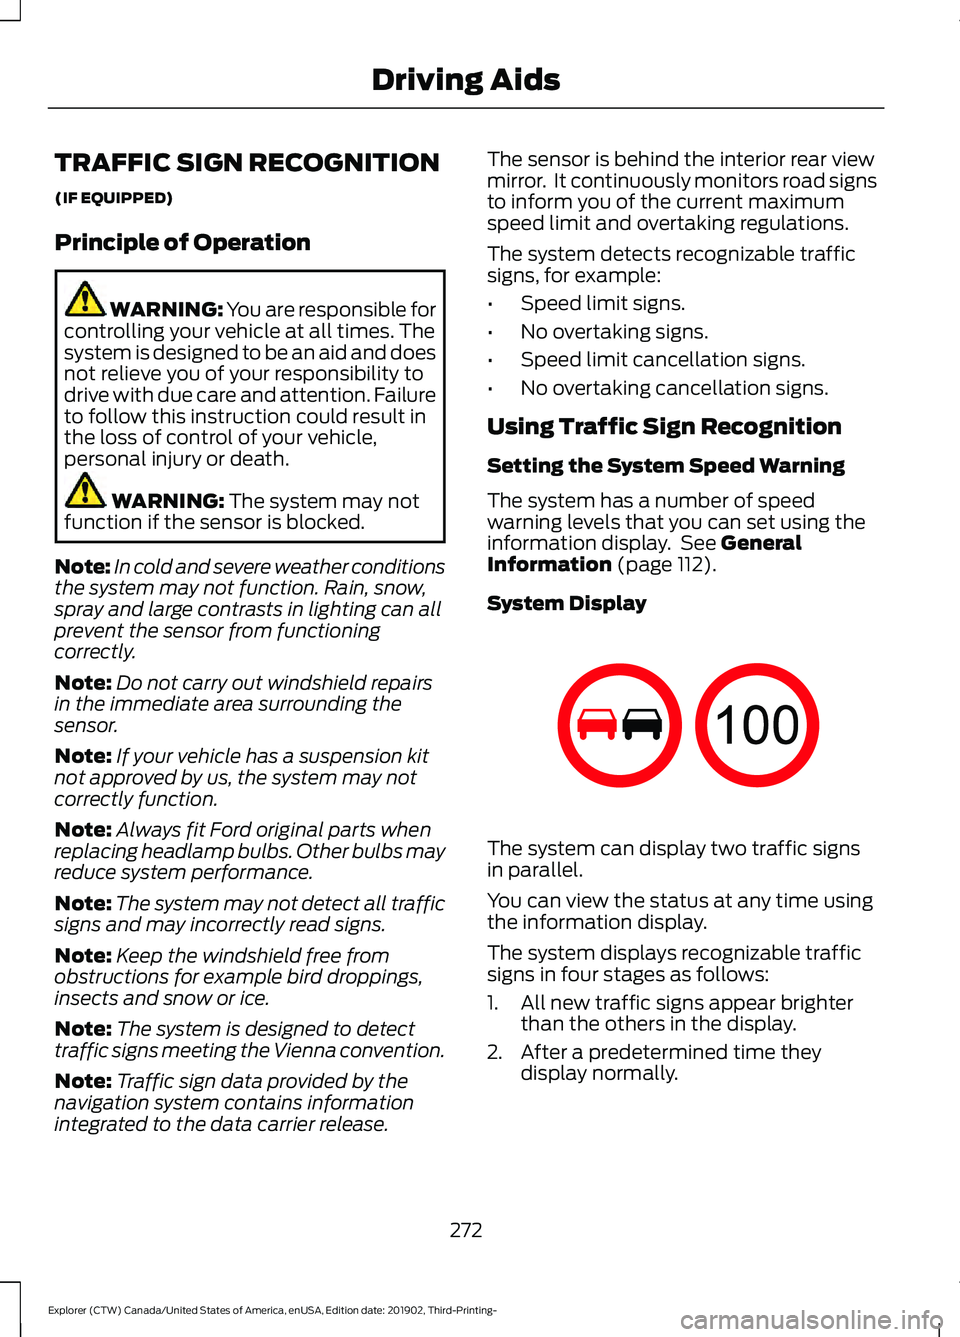 FORD EXPLORER 2020  Owners Manual TRAFFIC SIGN RECOGNITION
(IF EQUIPPED)
Principle of Operation
WARNING: You are responsible for
controlling your vehicle at all times. The
system is designed to be an aid and does
not relieve you of yo